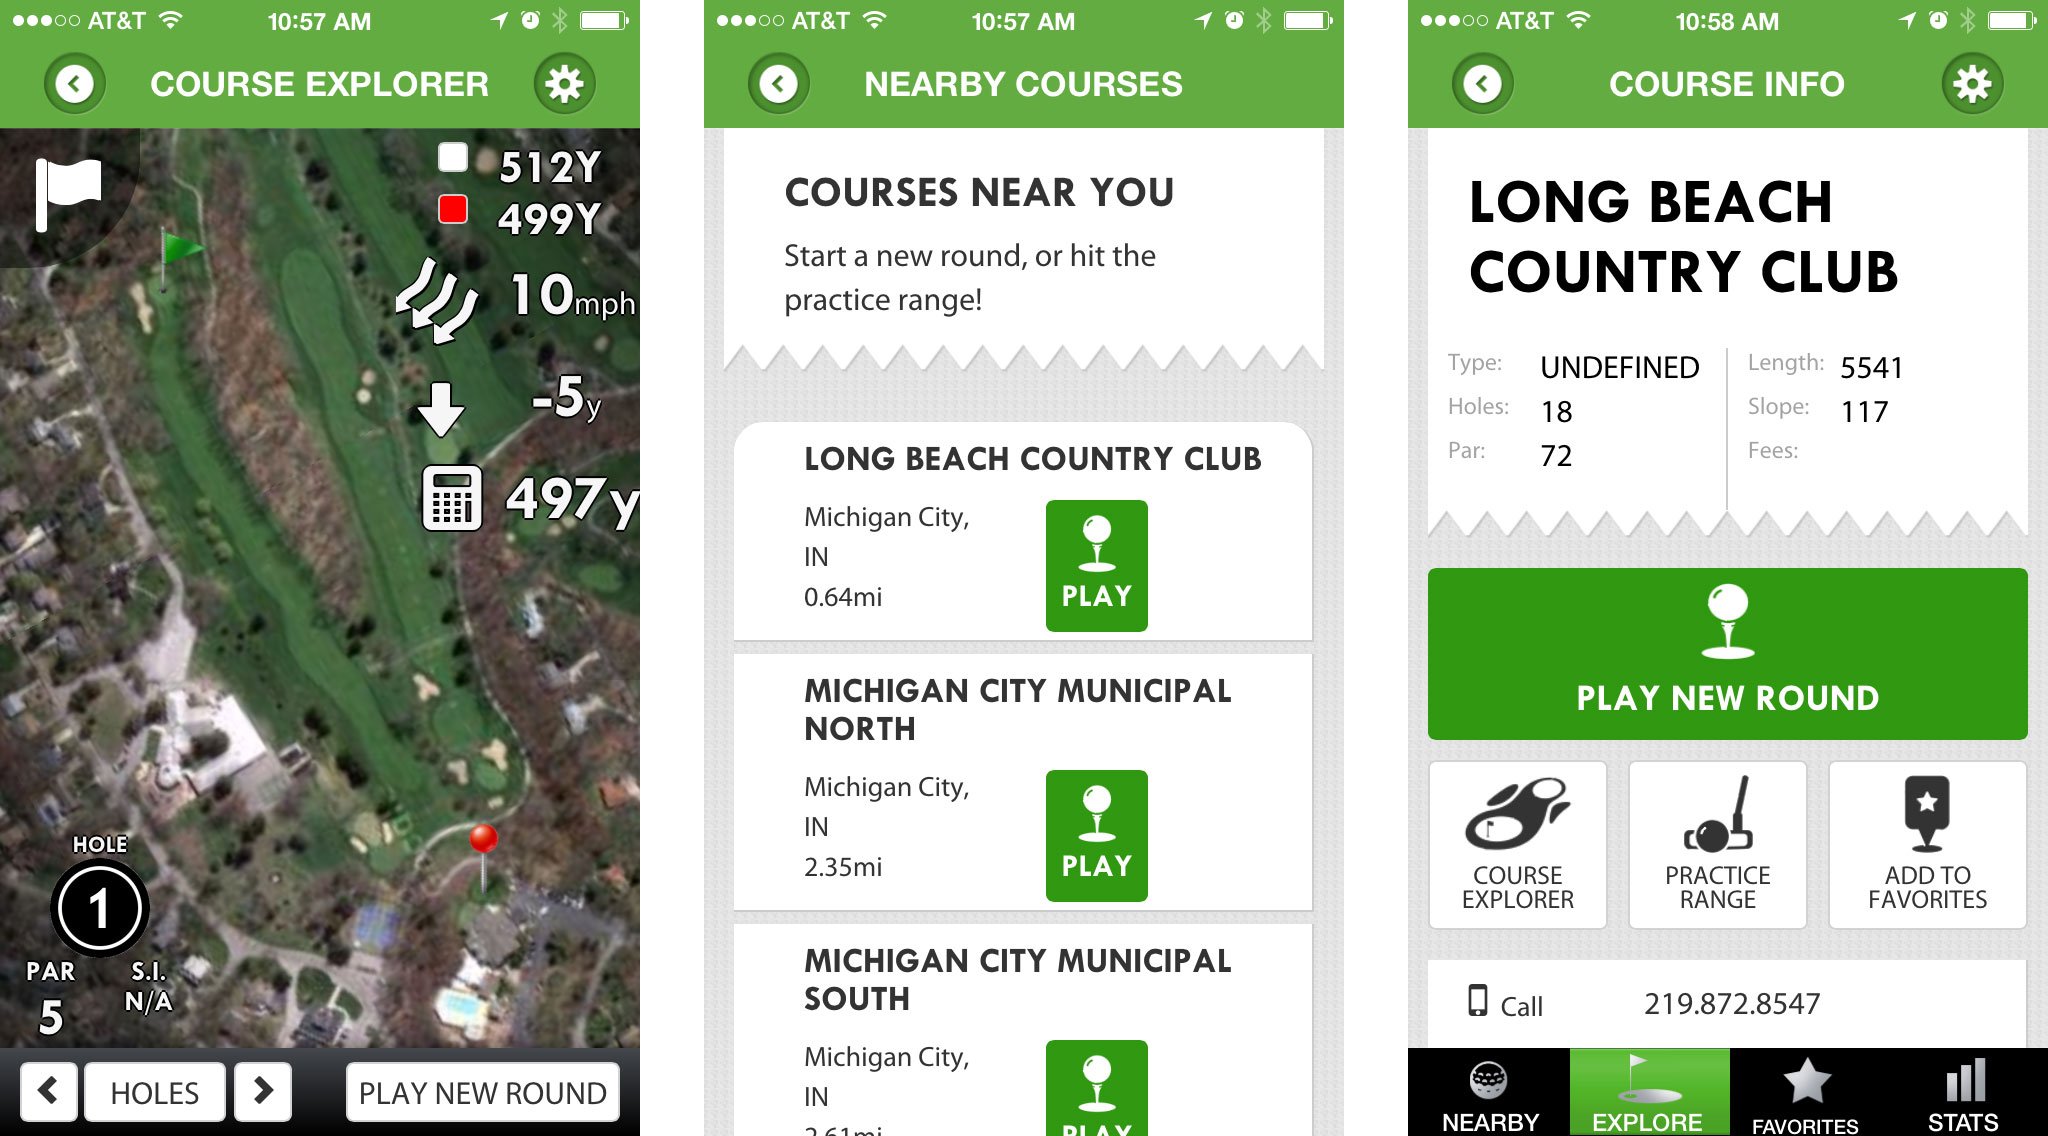 Best golfing apps for iPhone: Golf GPS and Scorecard by Swing by Swing